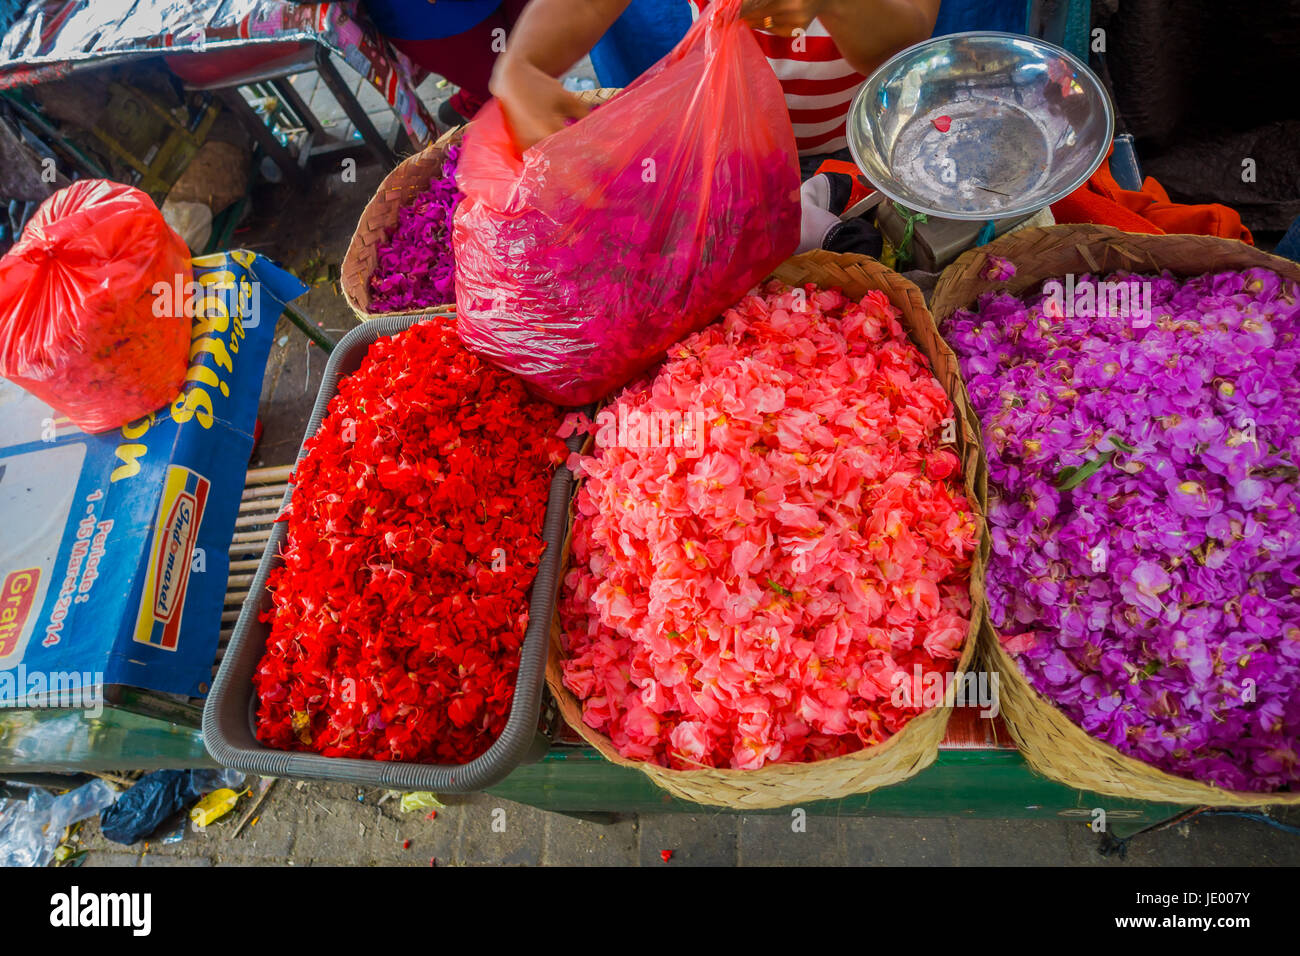 Outdoor Bali flower market. Flowers are used daily by Balinese Hindus as symbolic offerings at temples, inside of colorful baskets. Stock Photo